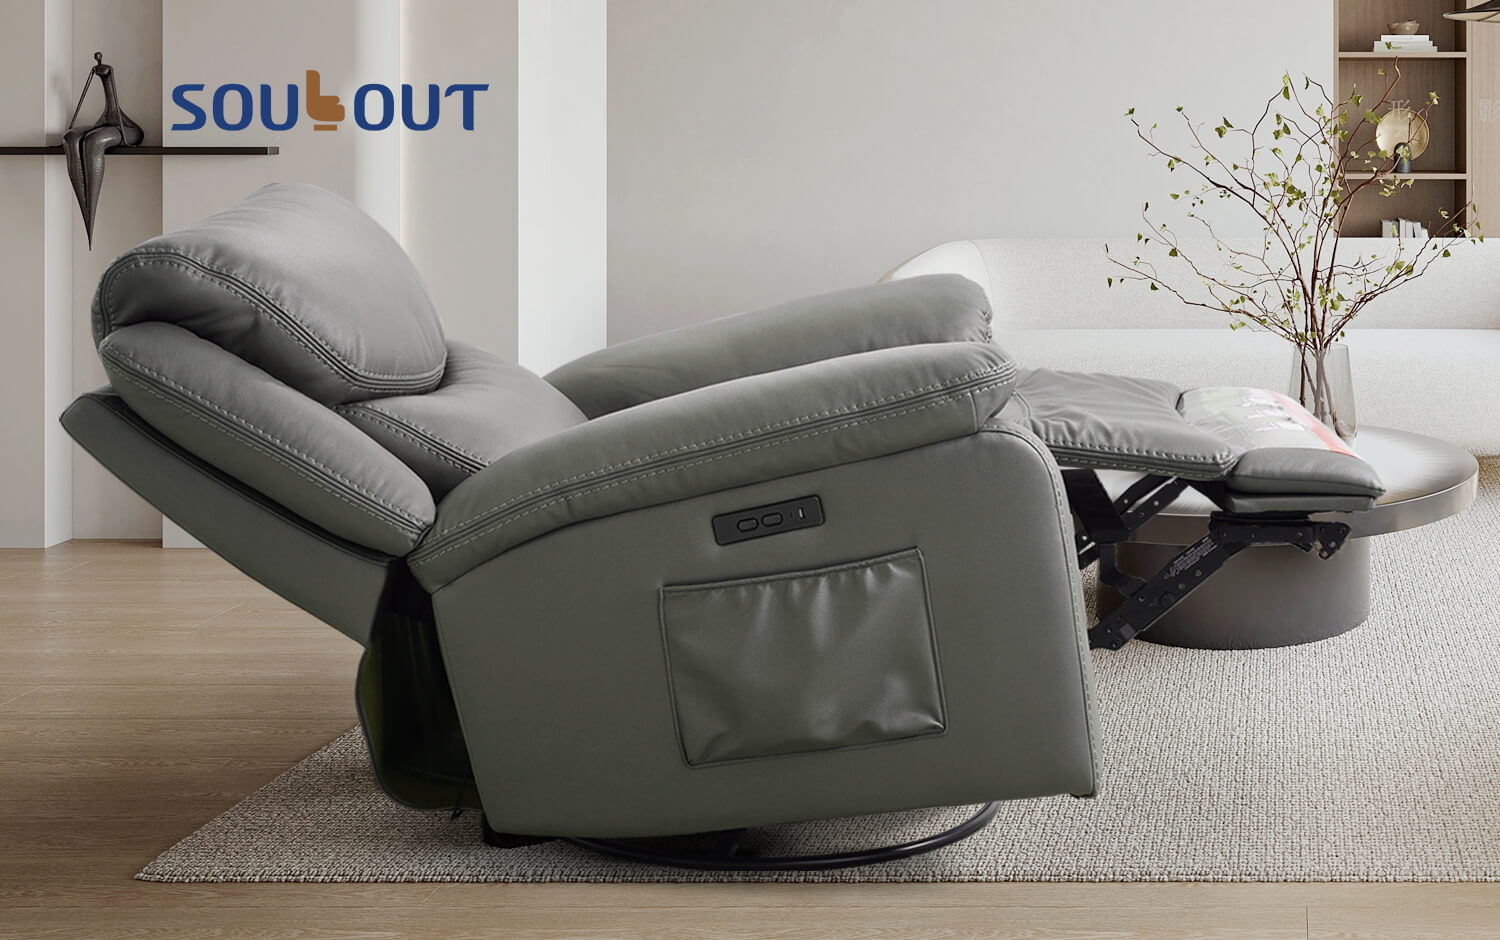 Soulout Swivel Glider Rocking Recliner